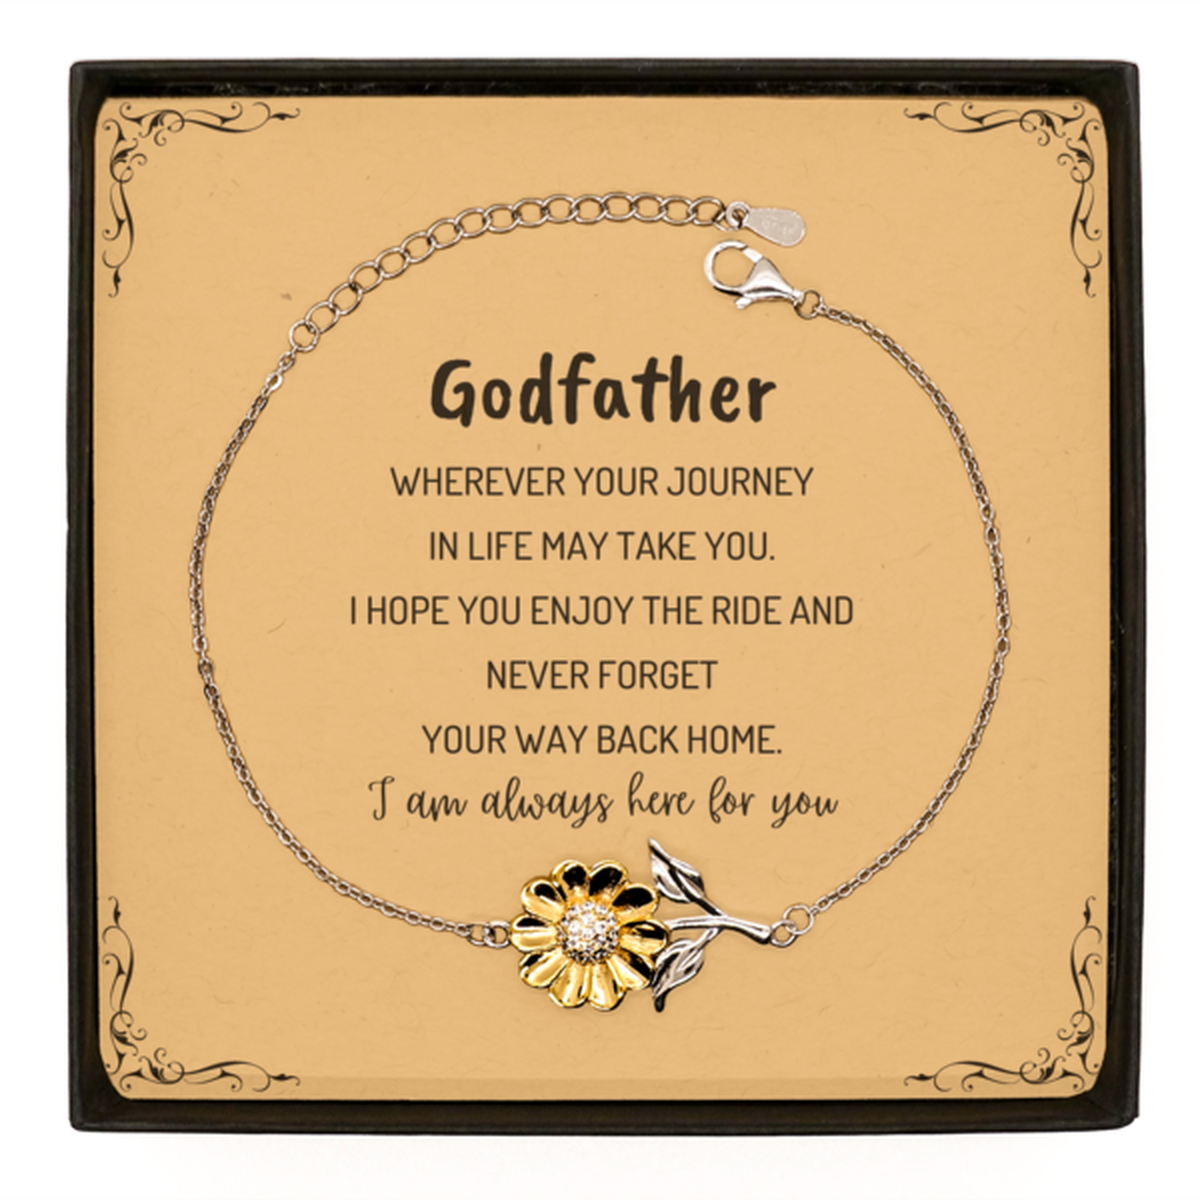 Godfather wherever your journey in life may take you, I am always here for you Godfather Sunflower Bracelet, Awesome Christmas Gifts For Godfather Message Card, Godfather Birthday Gifts for Men Women Family Loved One